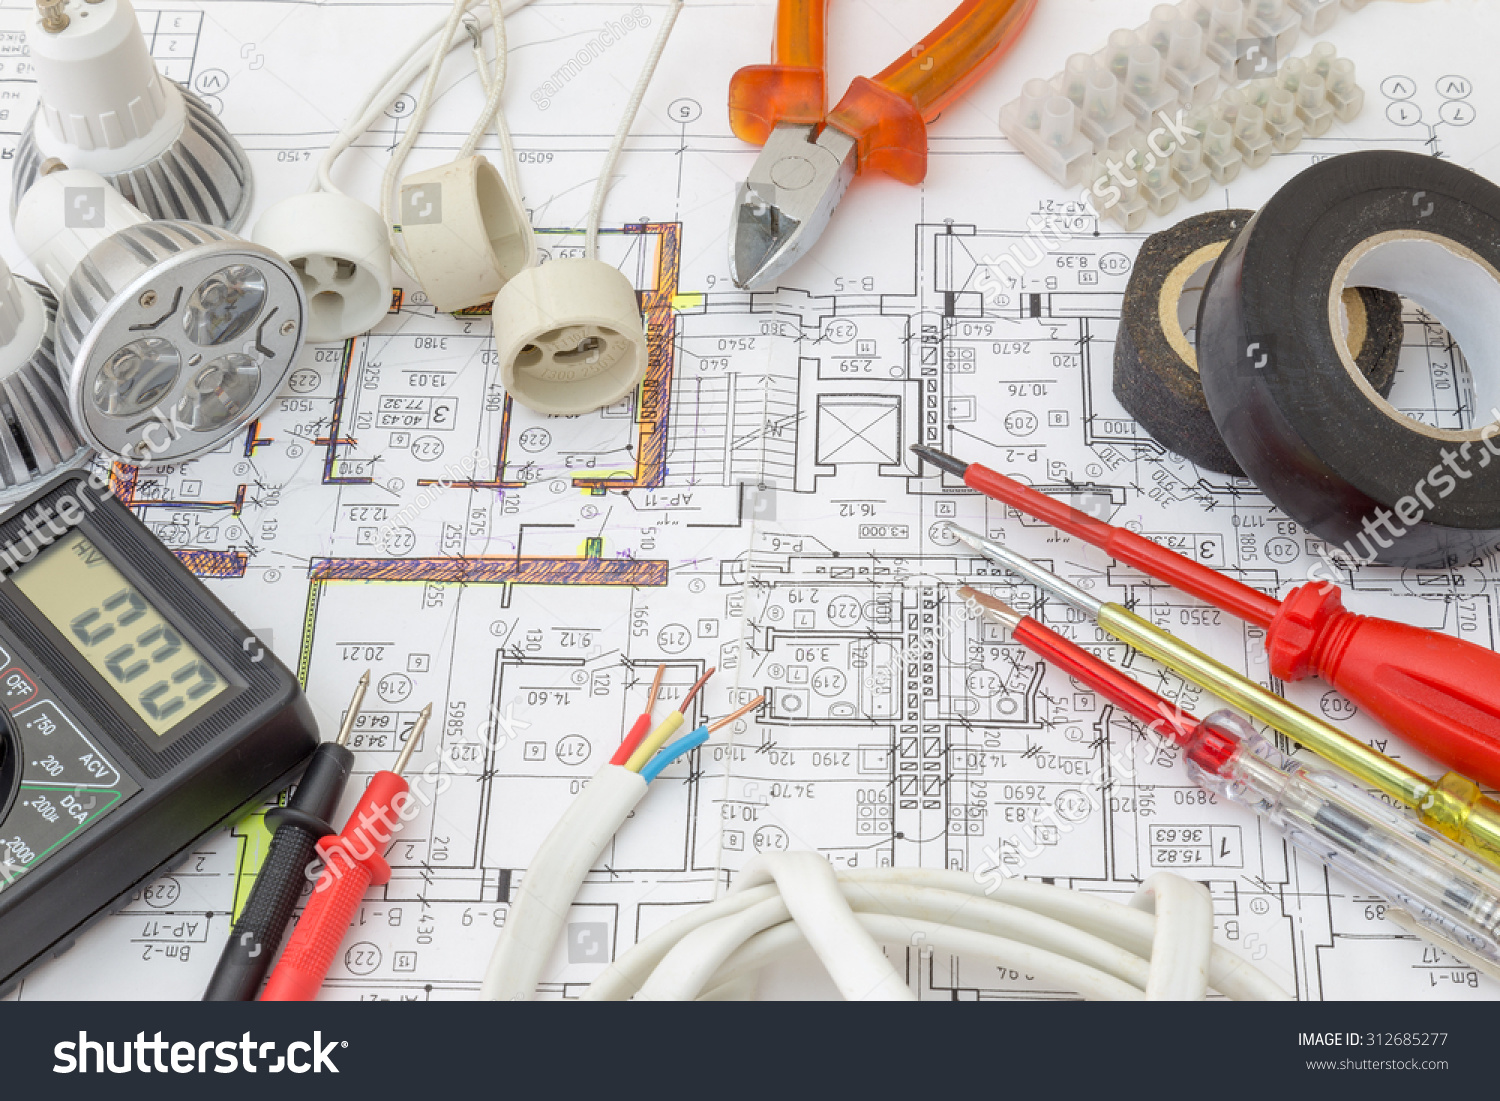 Still Life Of Electrical Components Arranged On Plans #312685277